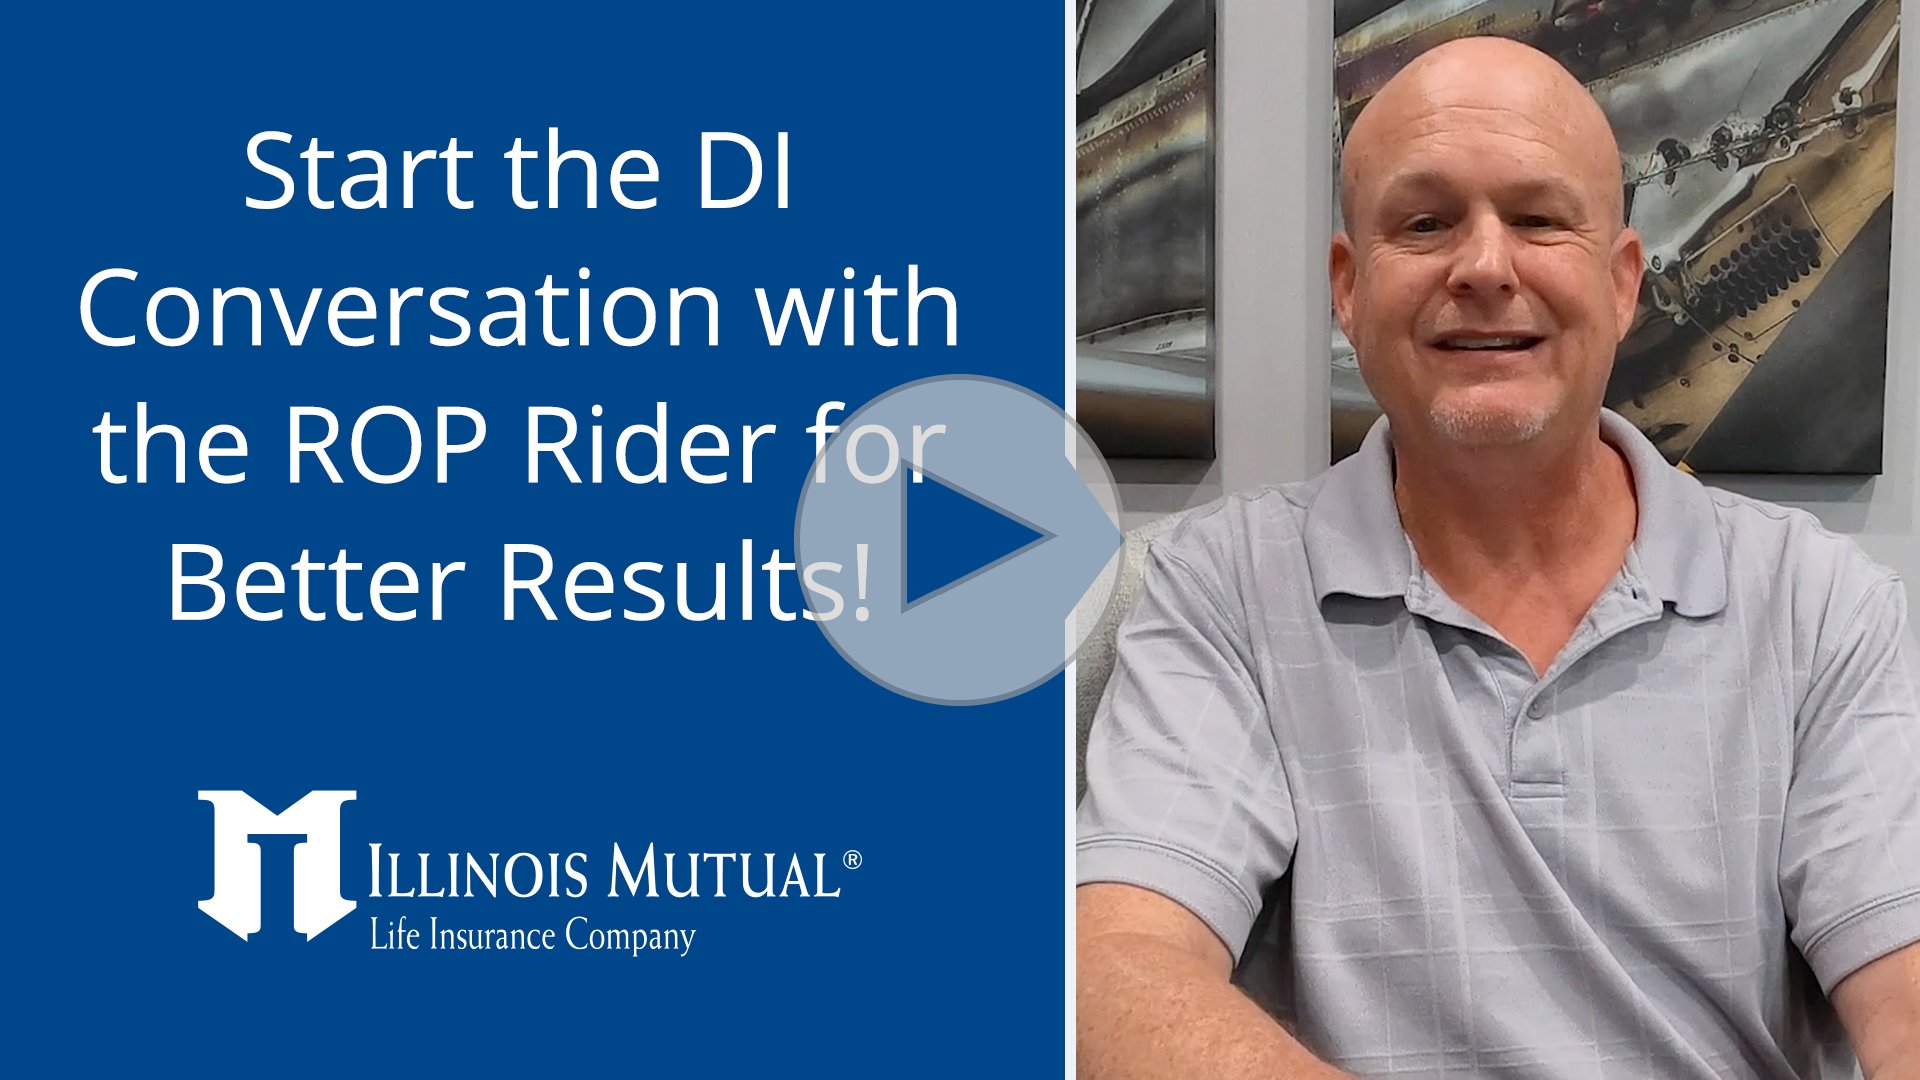 video thumbnail of Illinois Mutual agent and title - Start the DI Conversation with the ROP Rider for Better Results